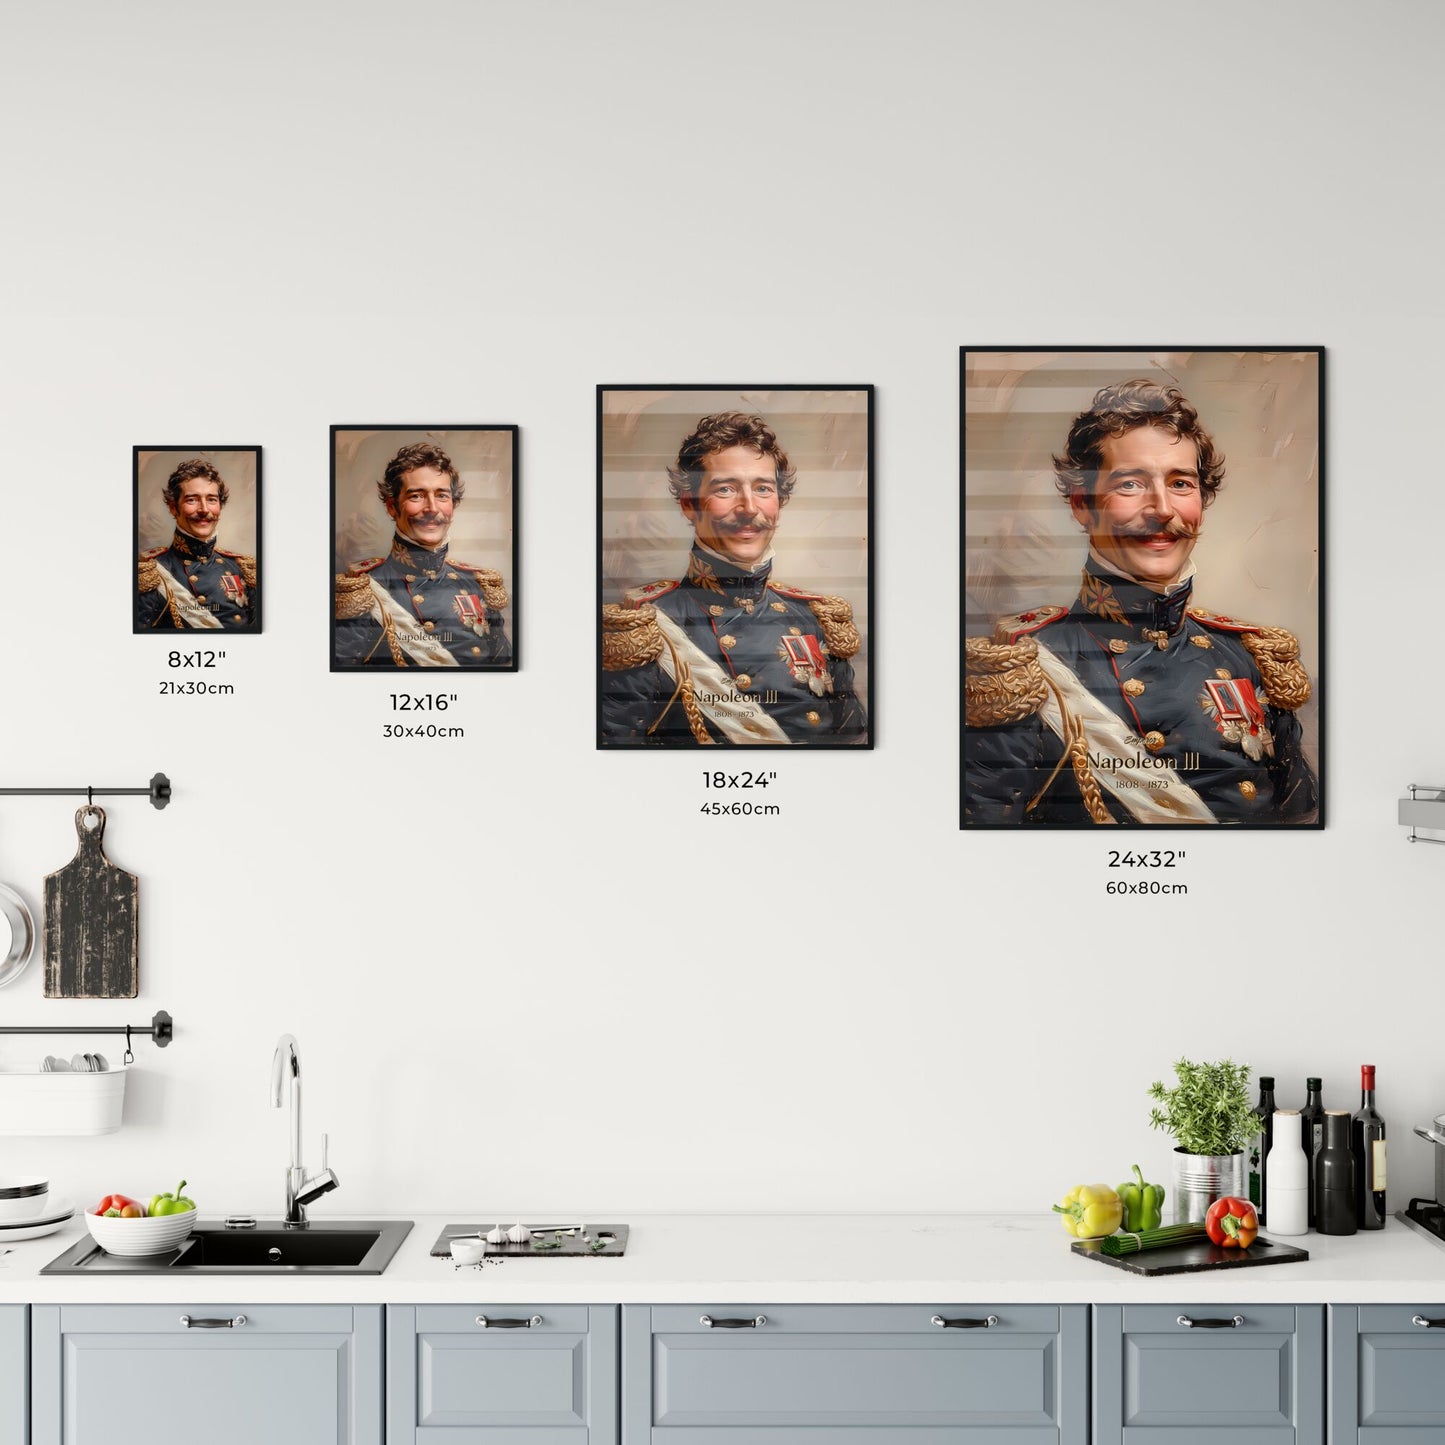 Emperor, Napoleon III, 1808 - 1873, A Poster of a man in a military uniform Default Title